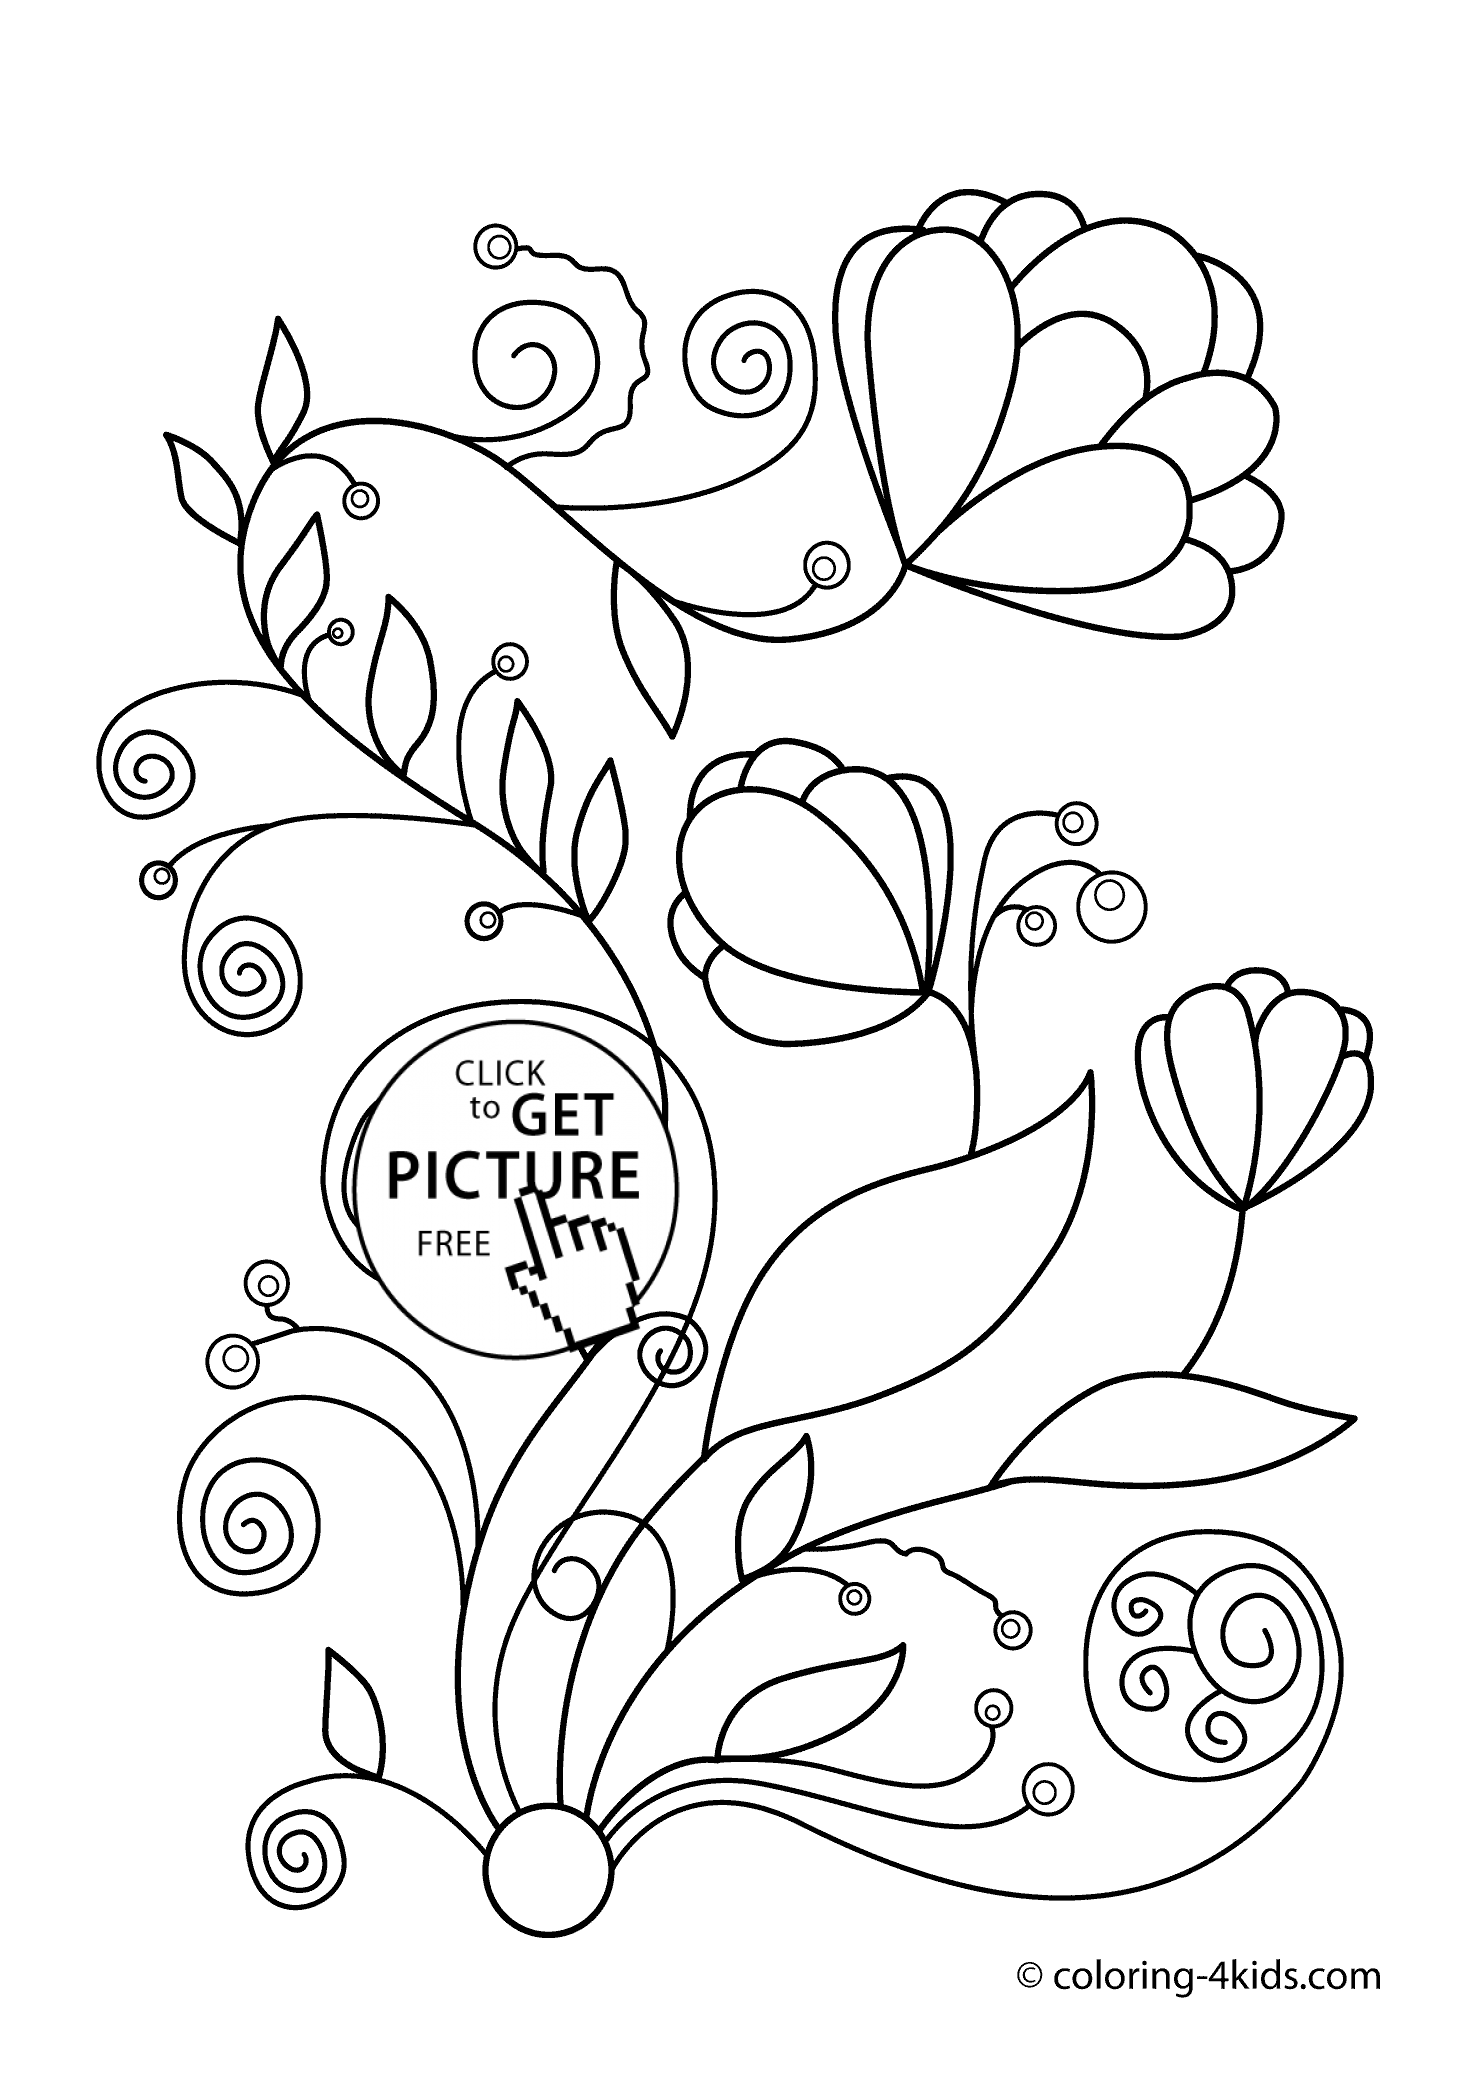 coloring pages of spring flowers spring flowers coloring pages gtgt disney coloring pages pages of flowers coloring spring 